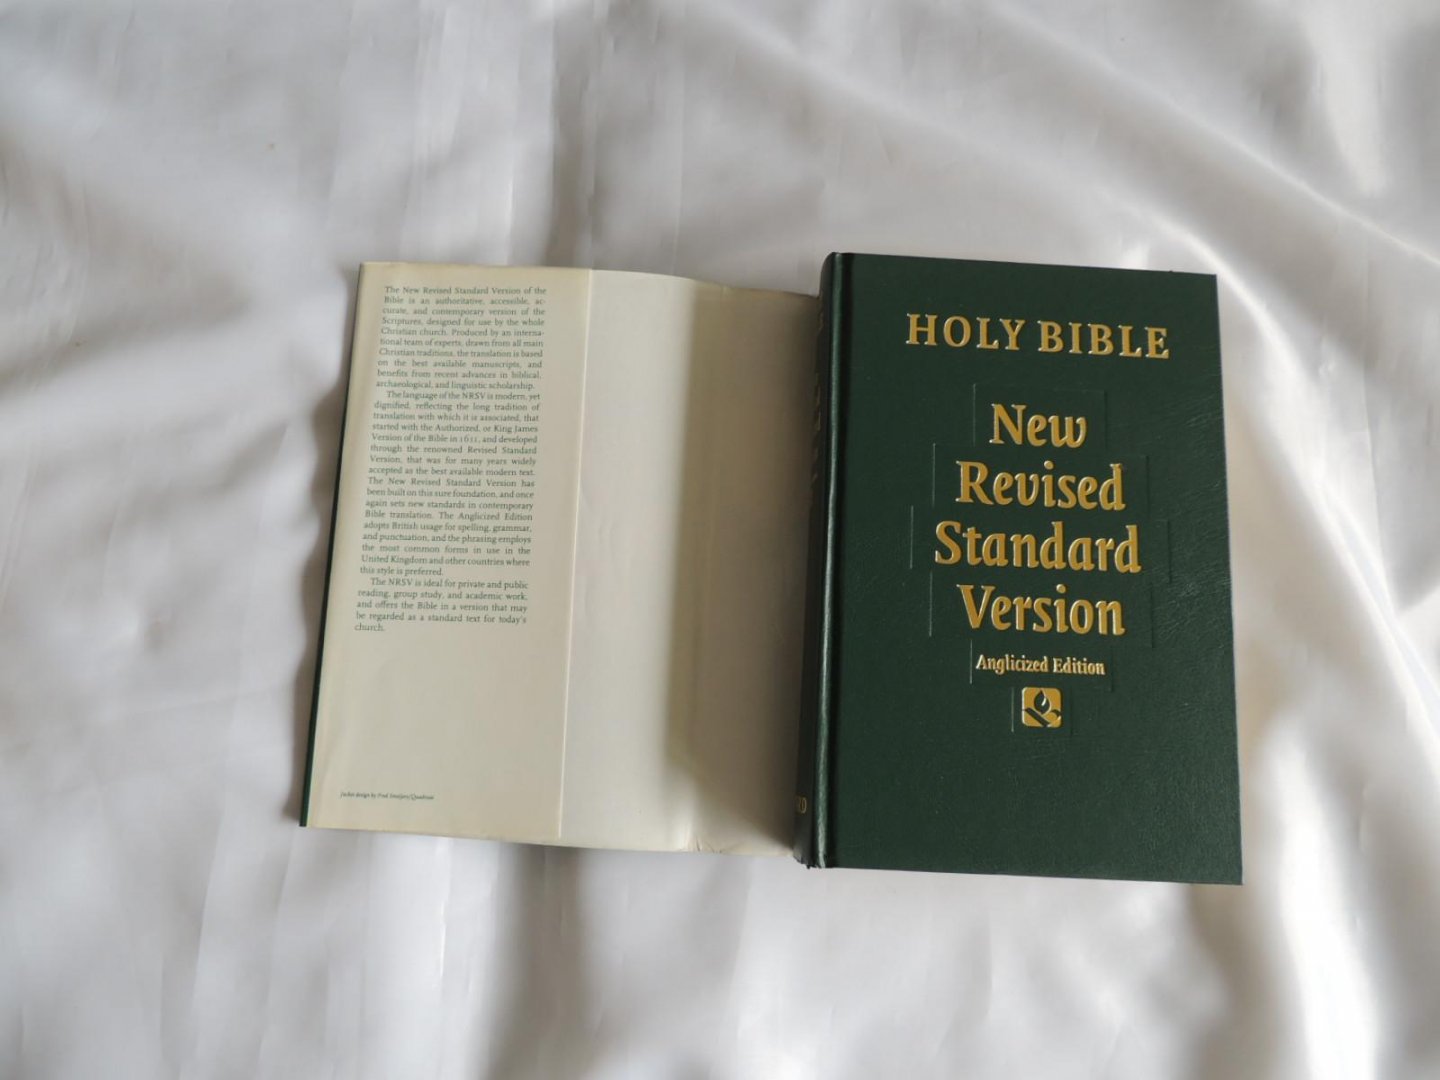  - Holy Bible: New Revised Standard Version Anglicized Edition